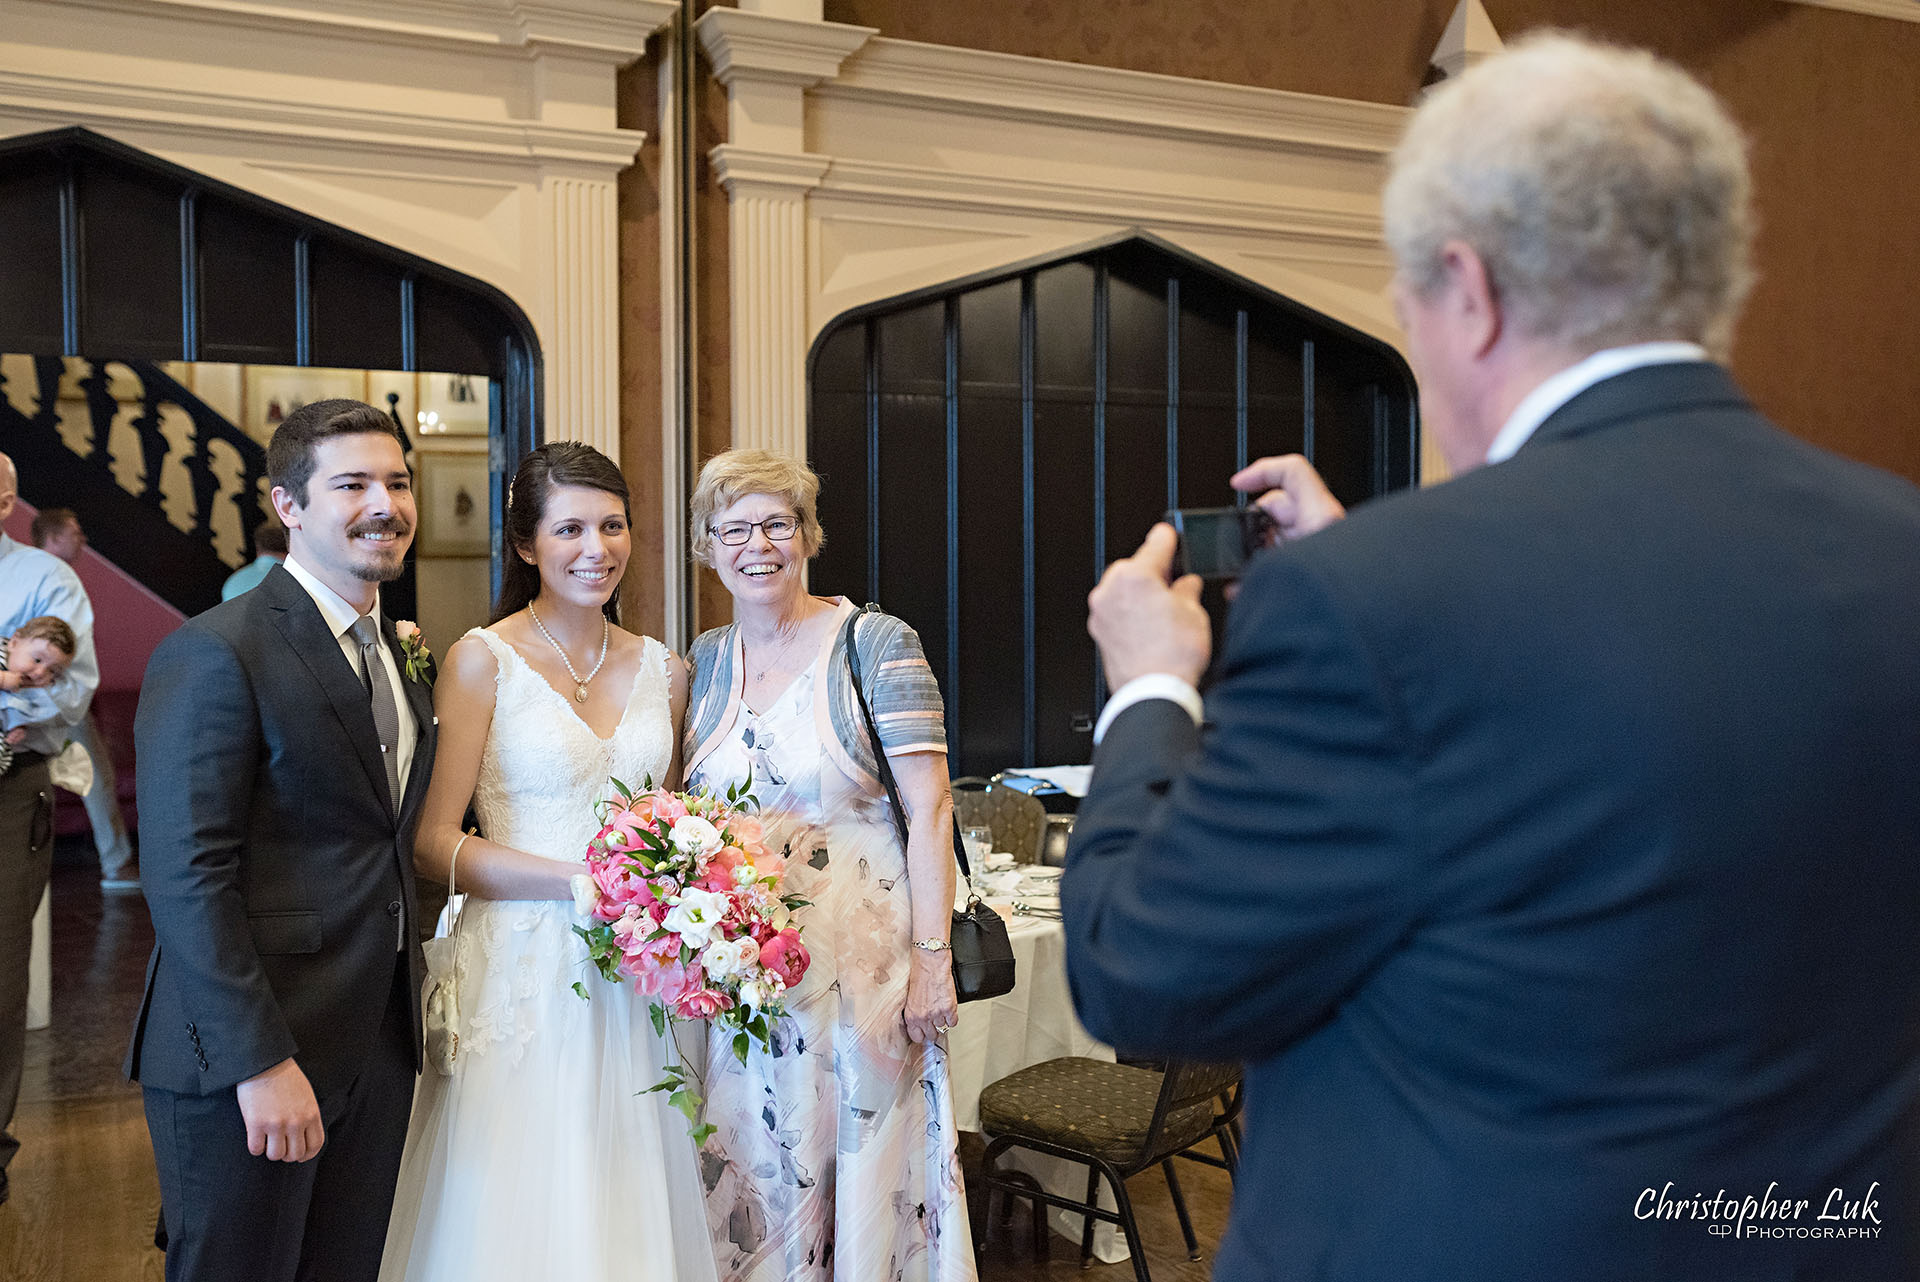 Christopher Luk Old Mill Toronto Wedding Photographer Wedding Bride Groom Guest Natural Candid Photojournalistic Over the Shoulder